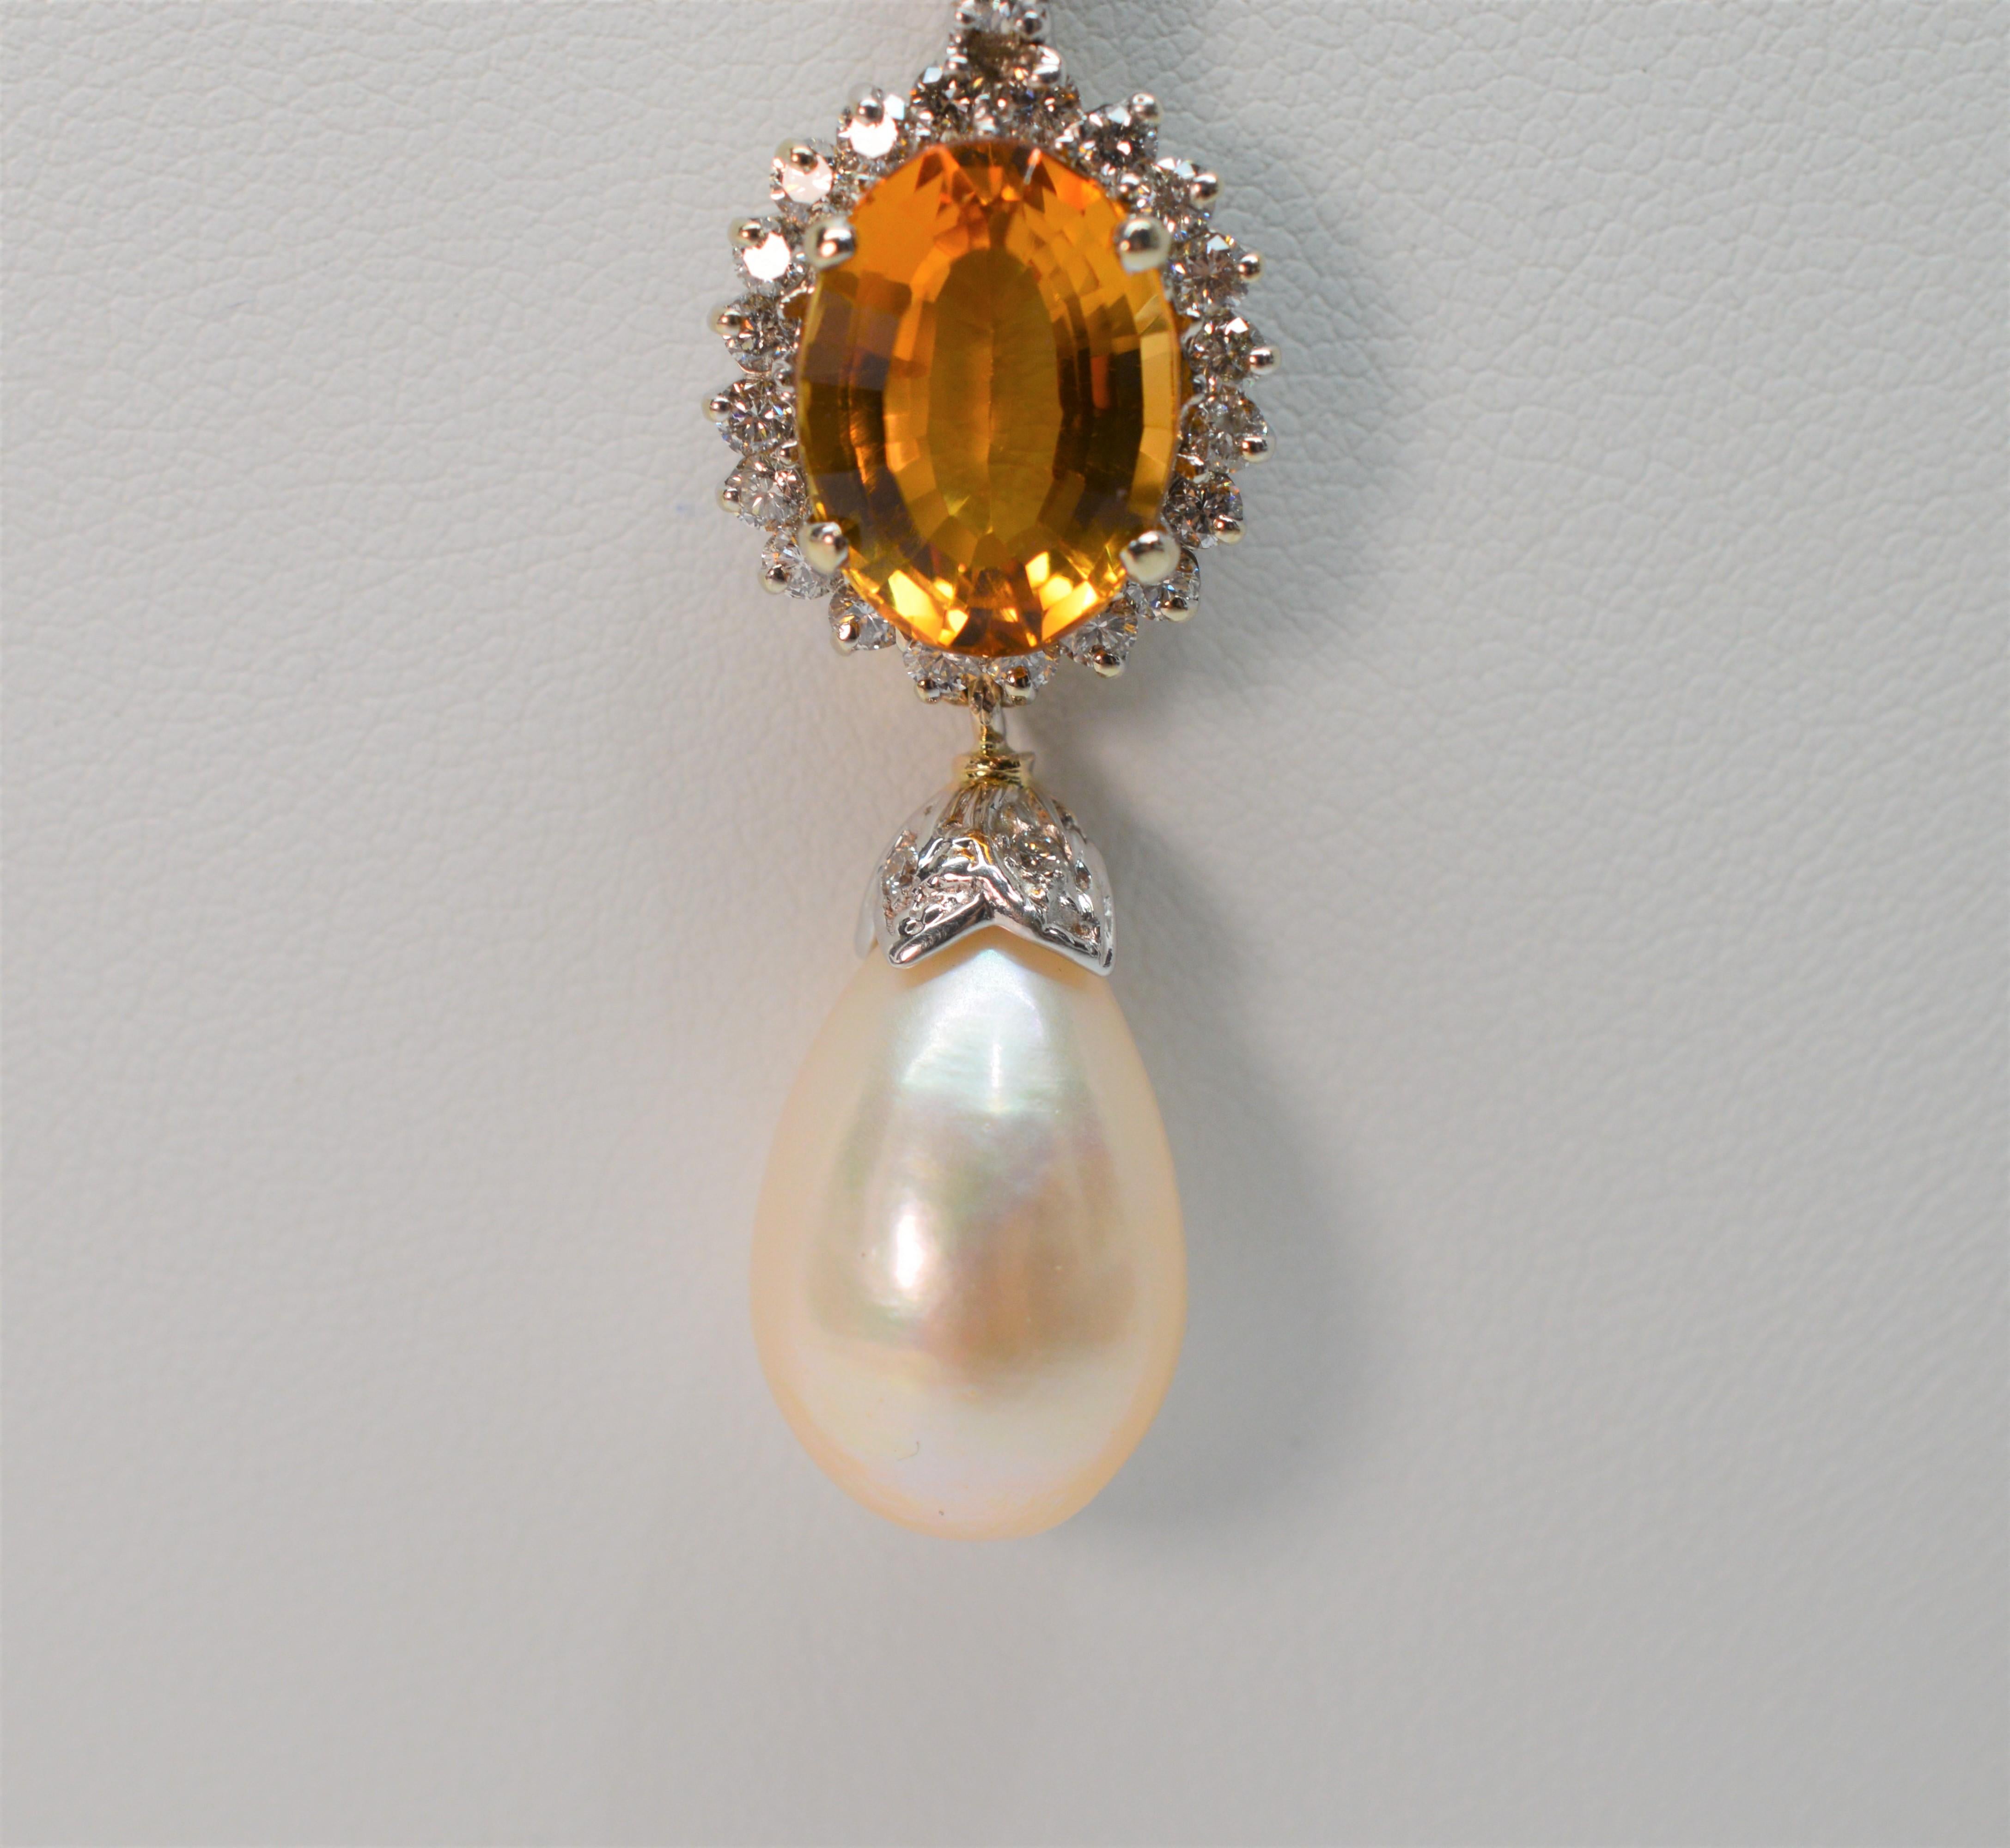 Citrine Pearl Tear Drop 14K White Gold Pendant Necklace  In Excellent Condition For Sale In Mount Kisco, NY